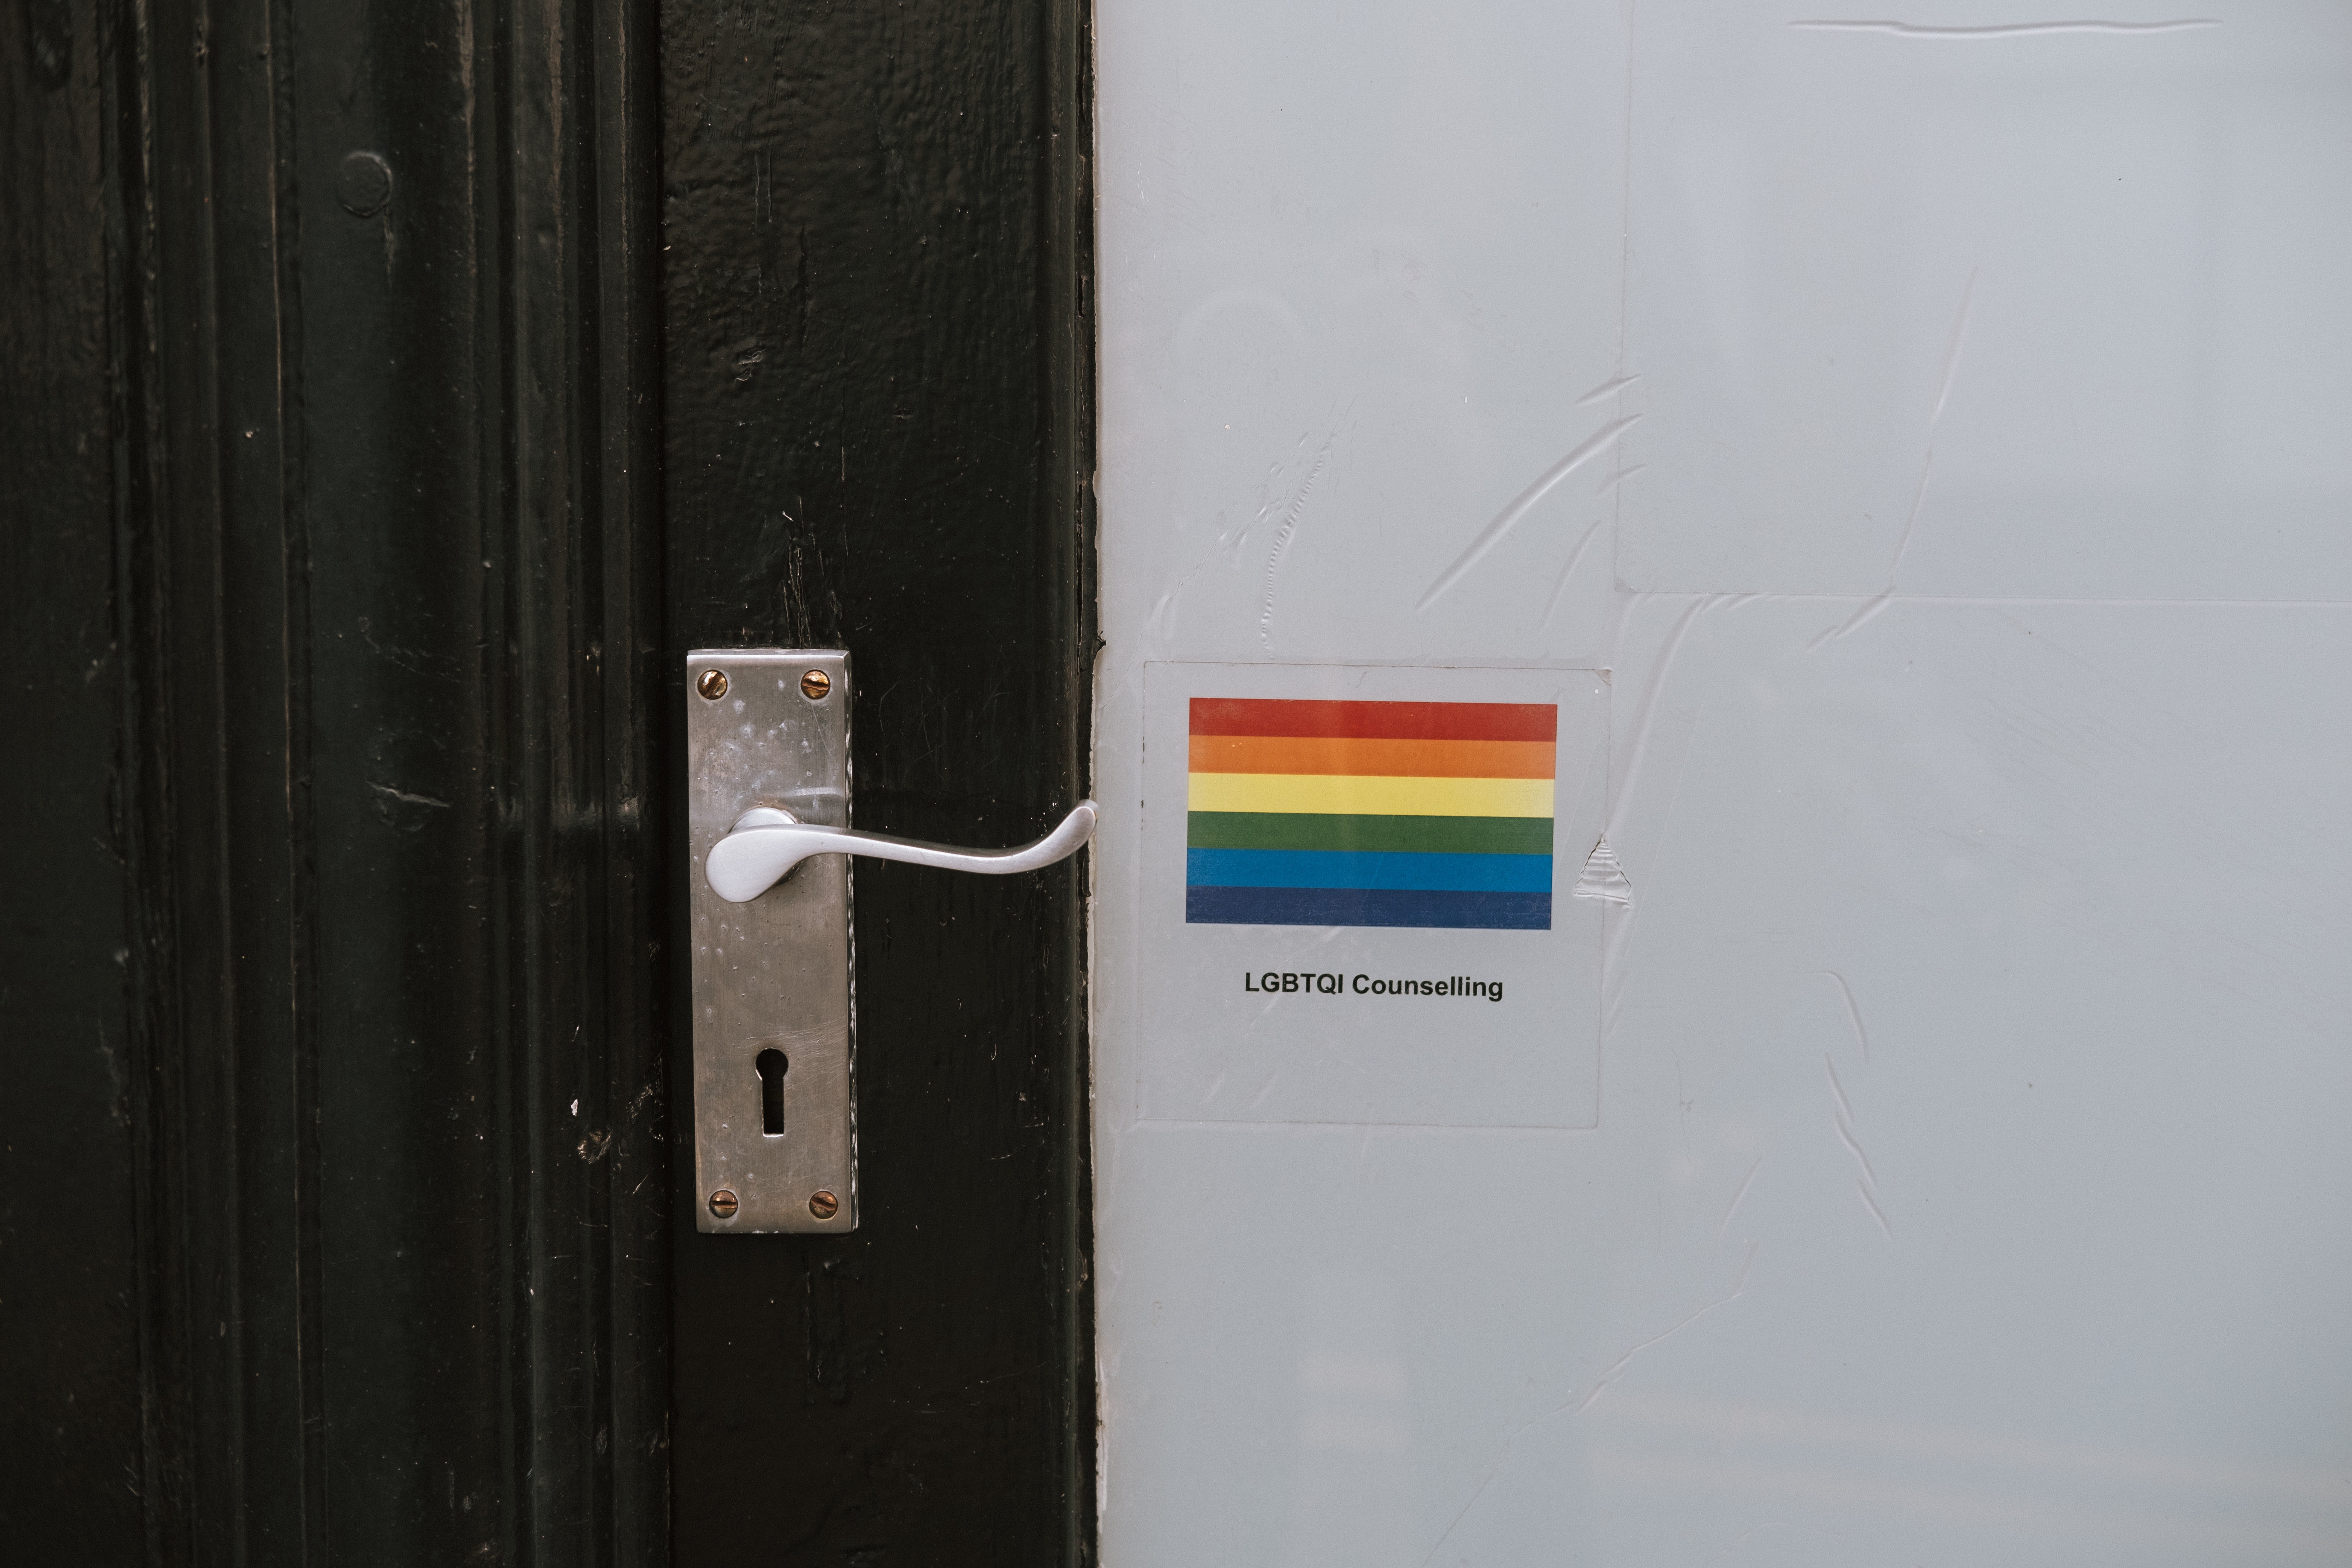 A pride rainbow flag sticker on a wall next to a wooden door with a silver door handle. Below the stick are the words "LGBTQI Counselling"